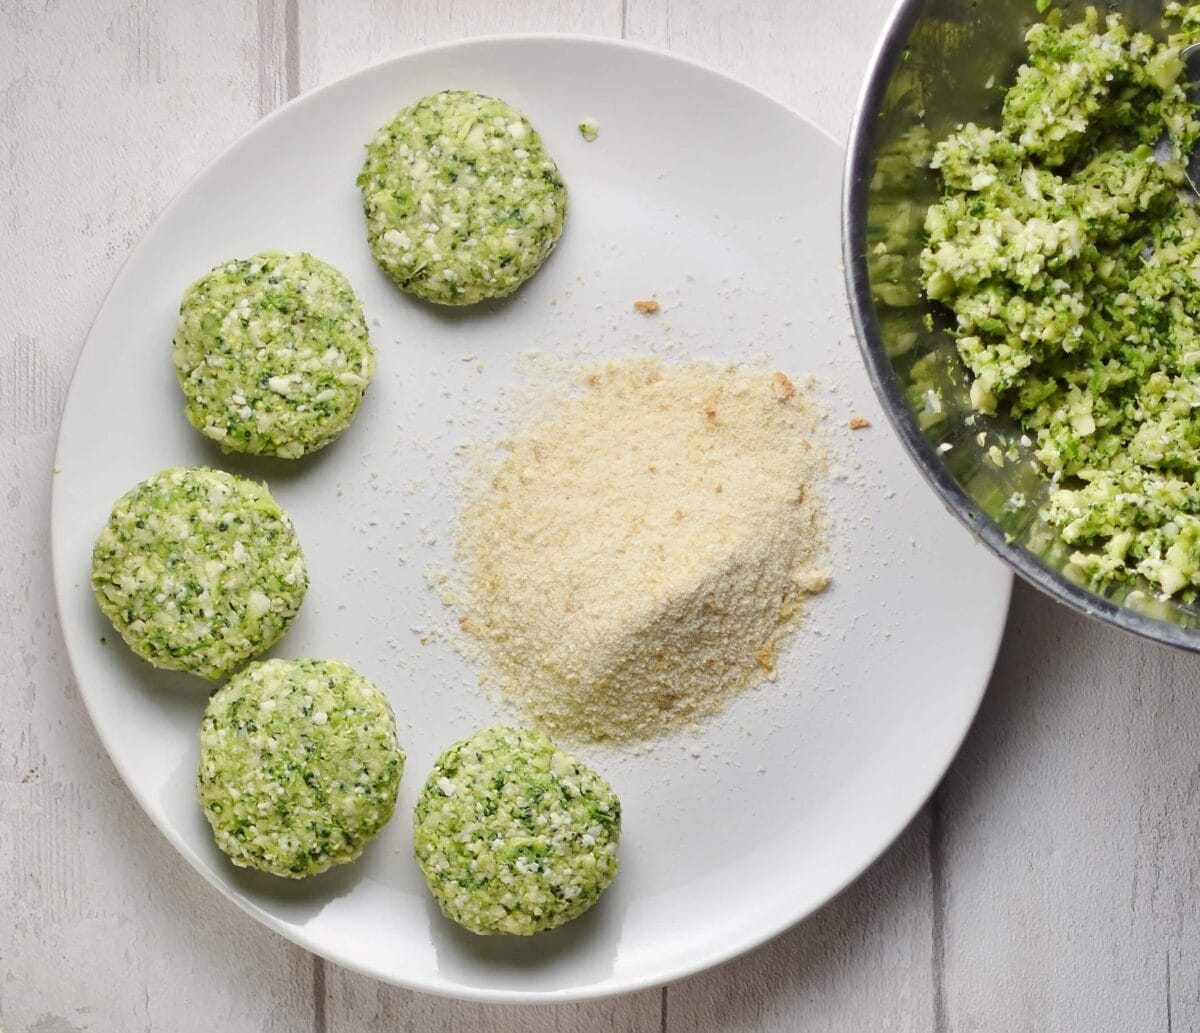 Top down view of raw broccoli patties with breadcrumbs on white plate.